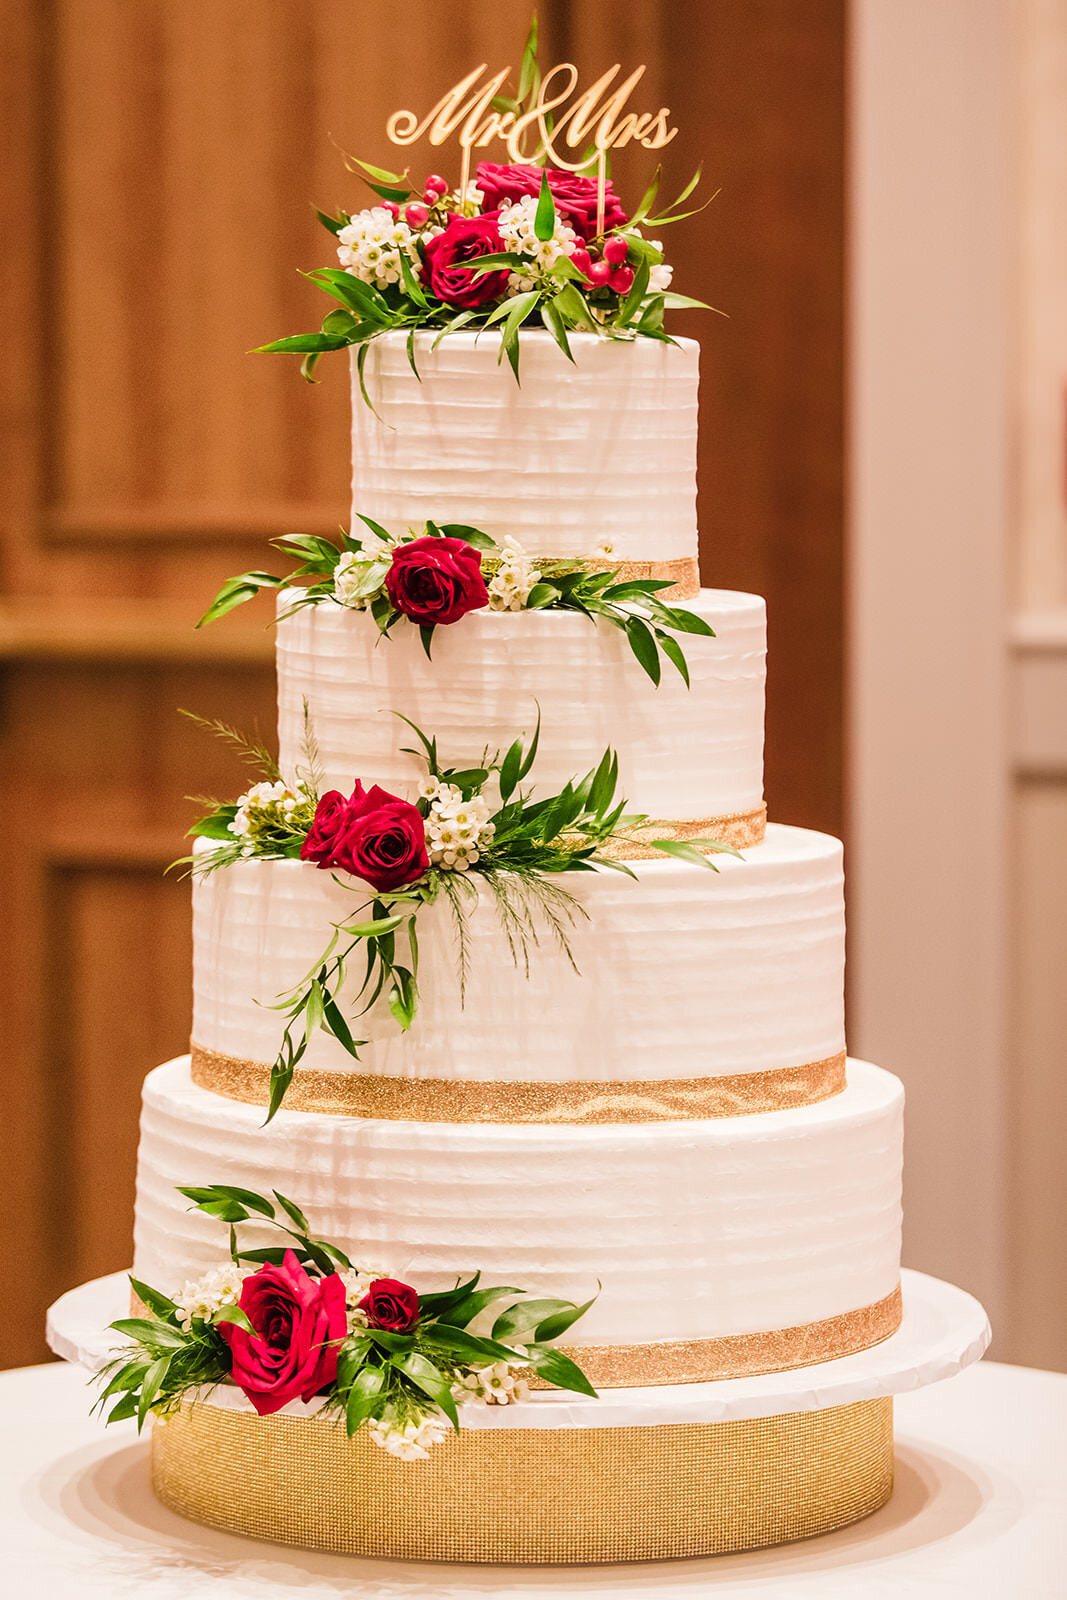 A multi-tiered wedding cake adorned with red roses and green foliage, topped with a 'Mr & Mrs' golden cake topper.